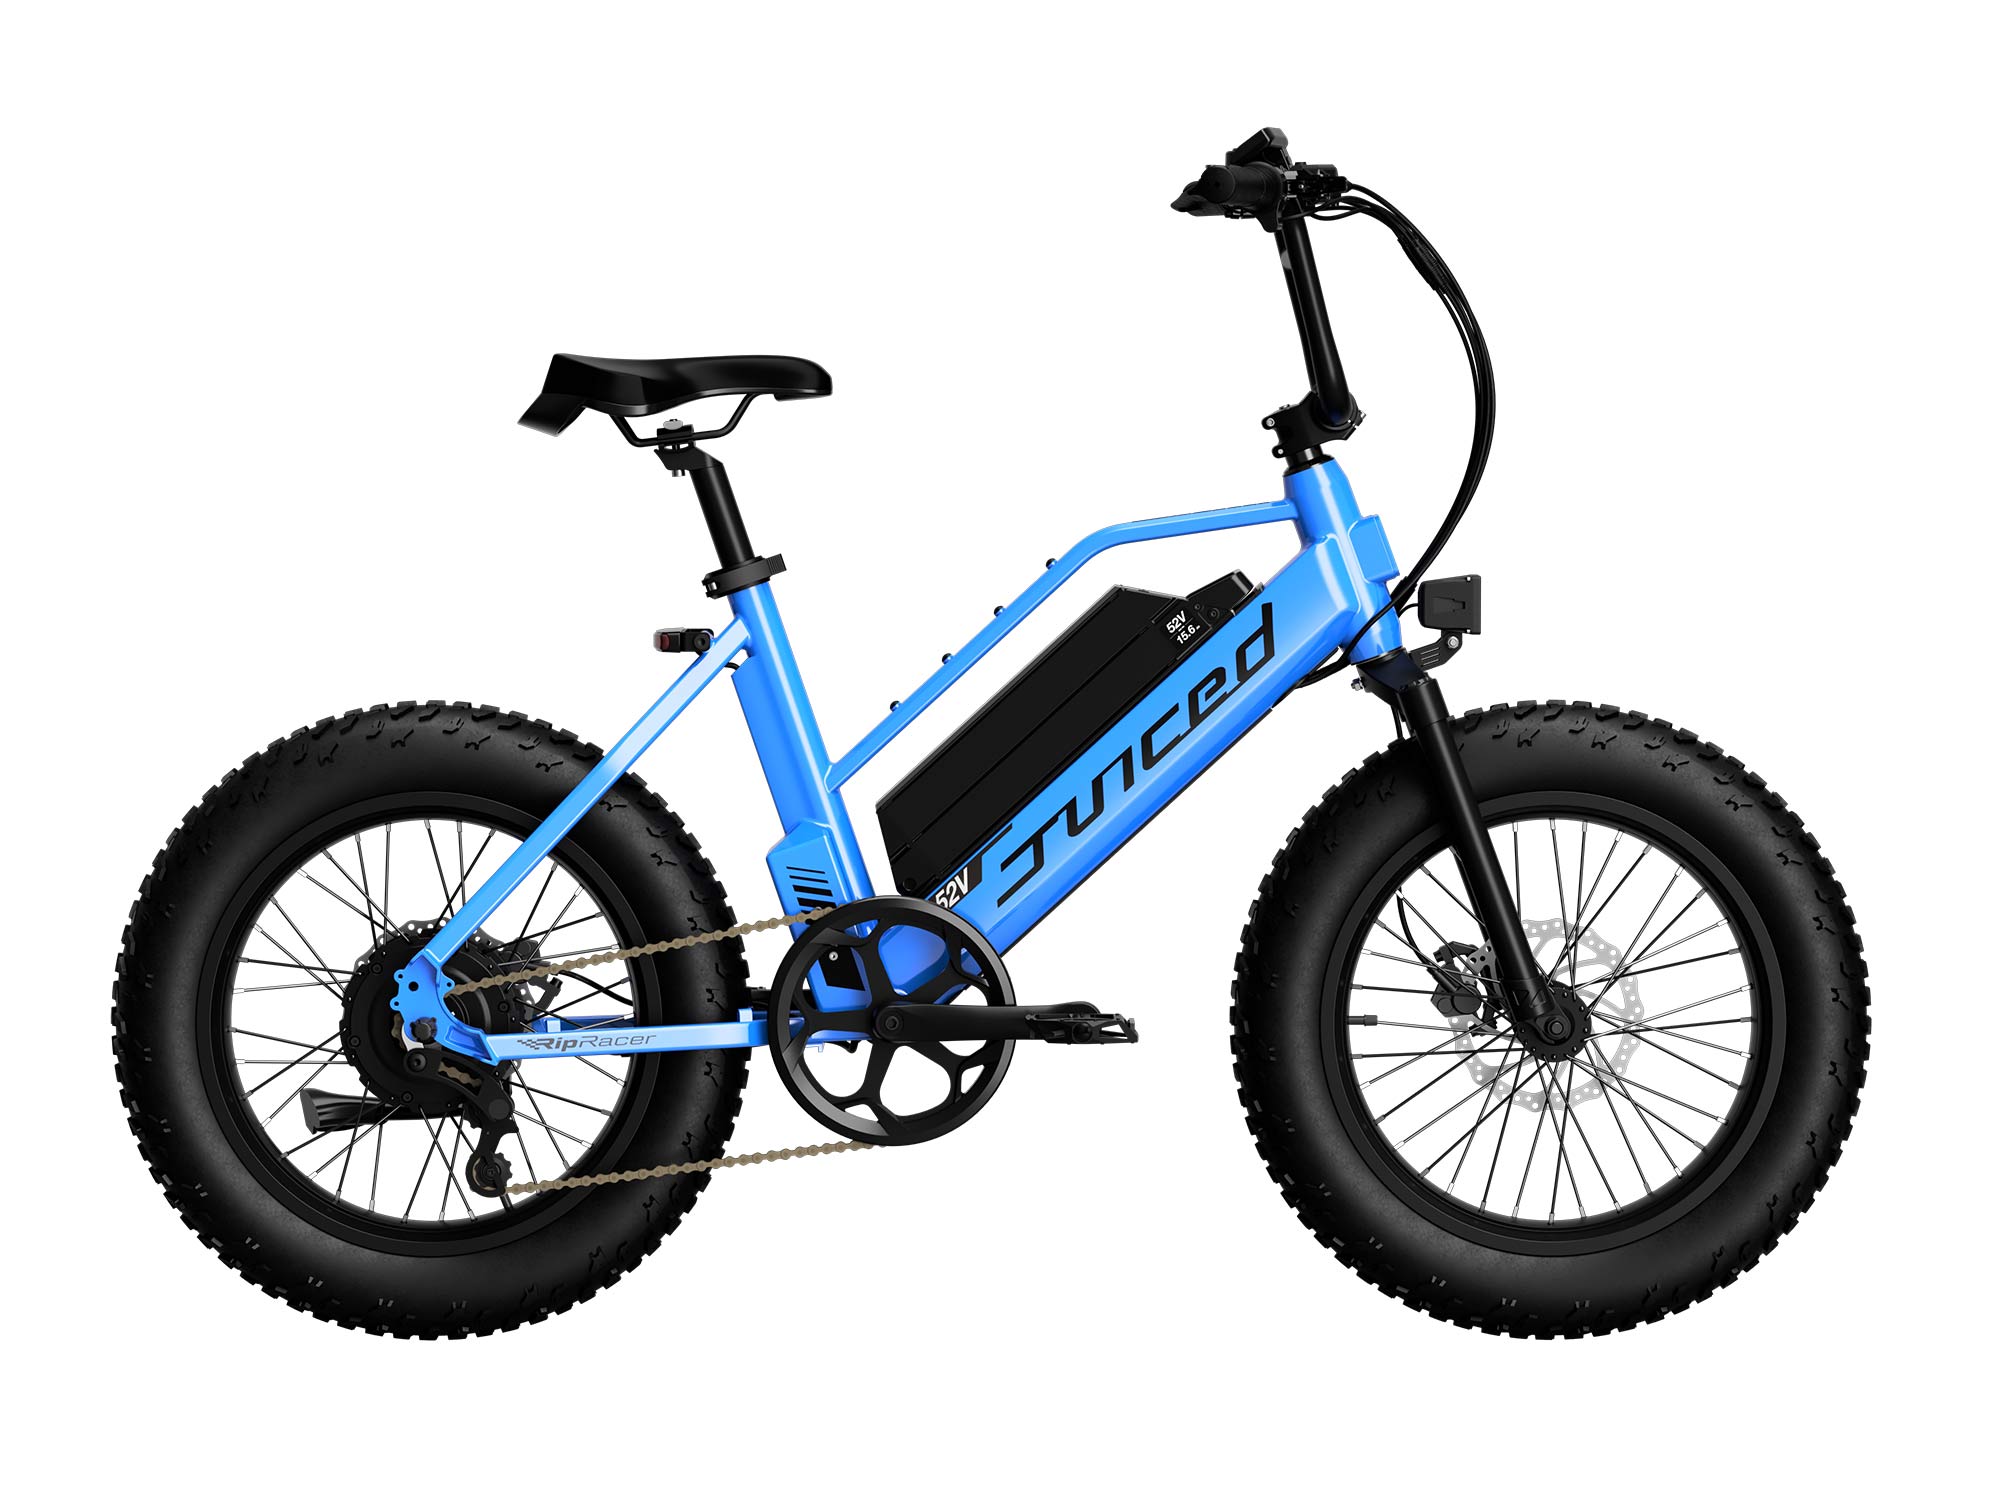 The RipRacer can be configured as a Class 2 or 3 ebike.